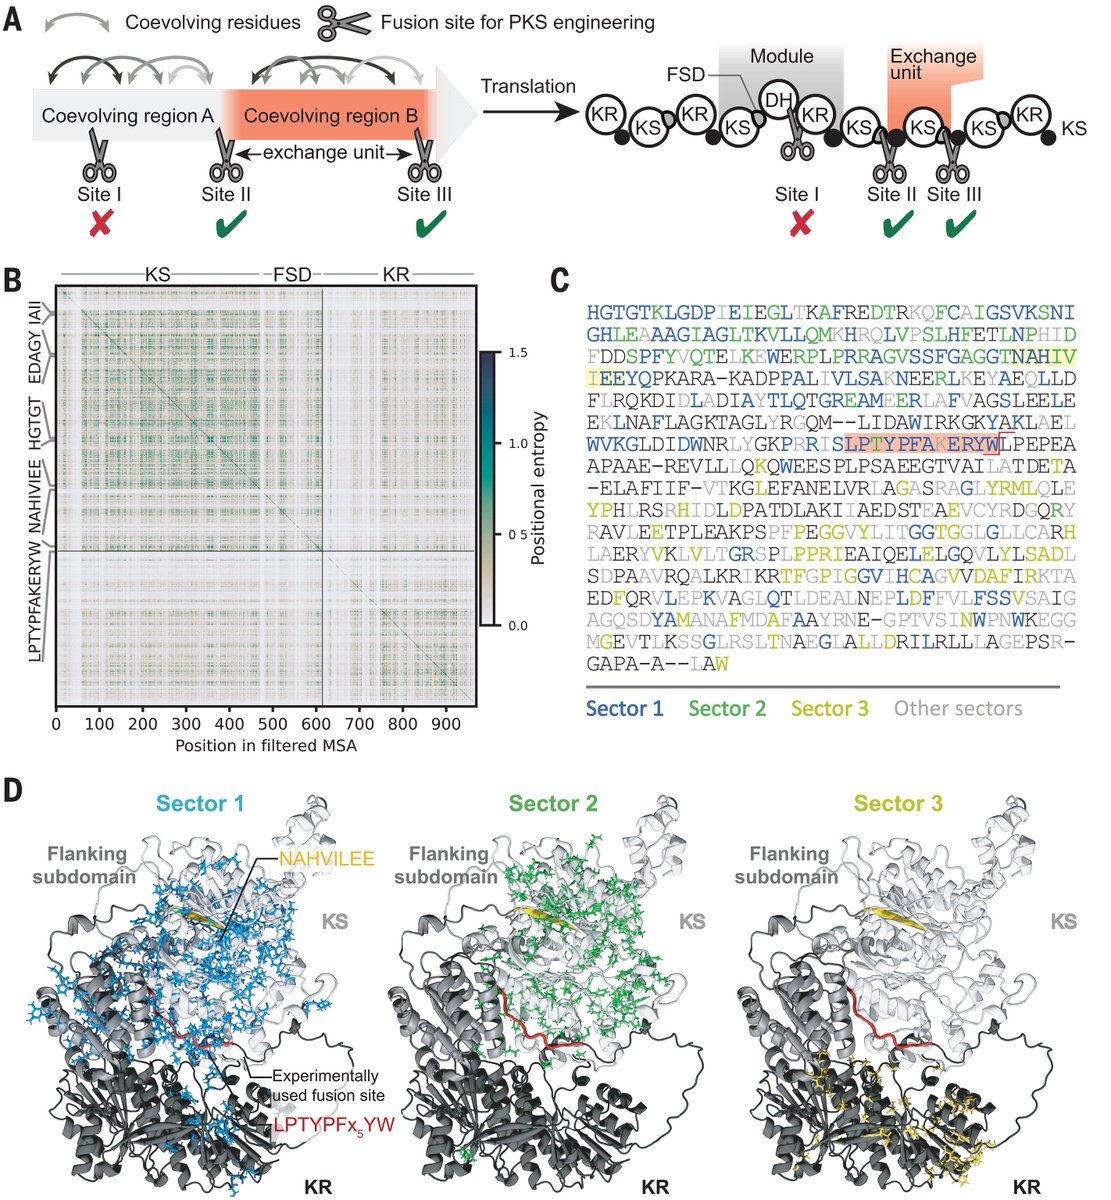 #Evolution-guided engineering of trans-acyltransferase polyketide synthases.

This study shows #engineering enzymes can diversify natural products, creating 22 new functional polyketide synthases. This method opens avenues for producing complex #therapeutic compounds.